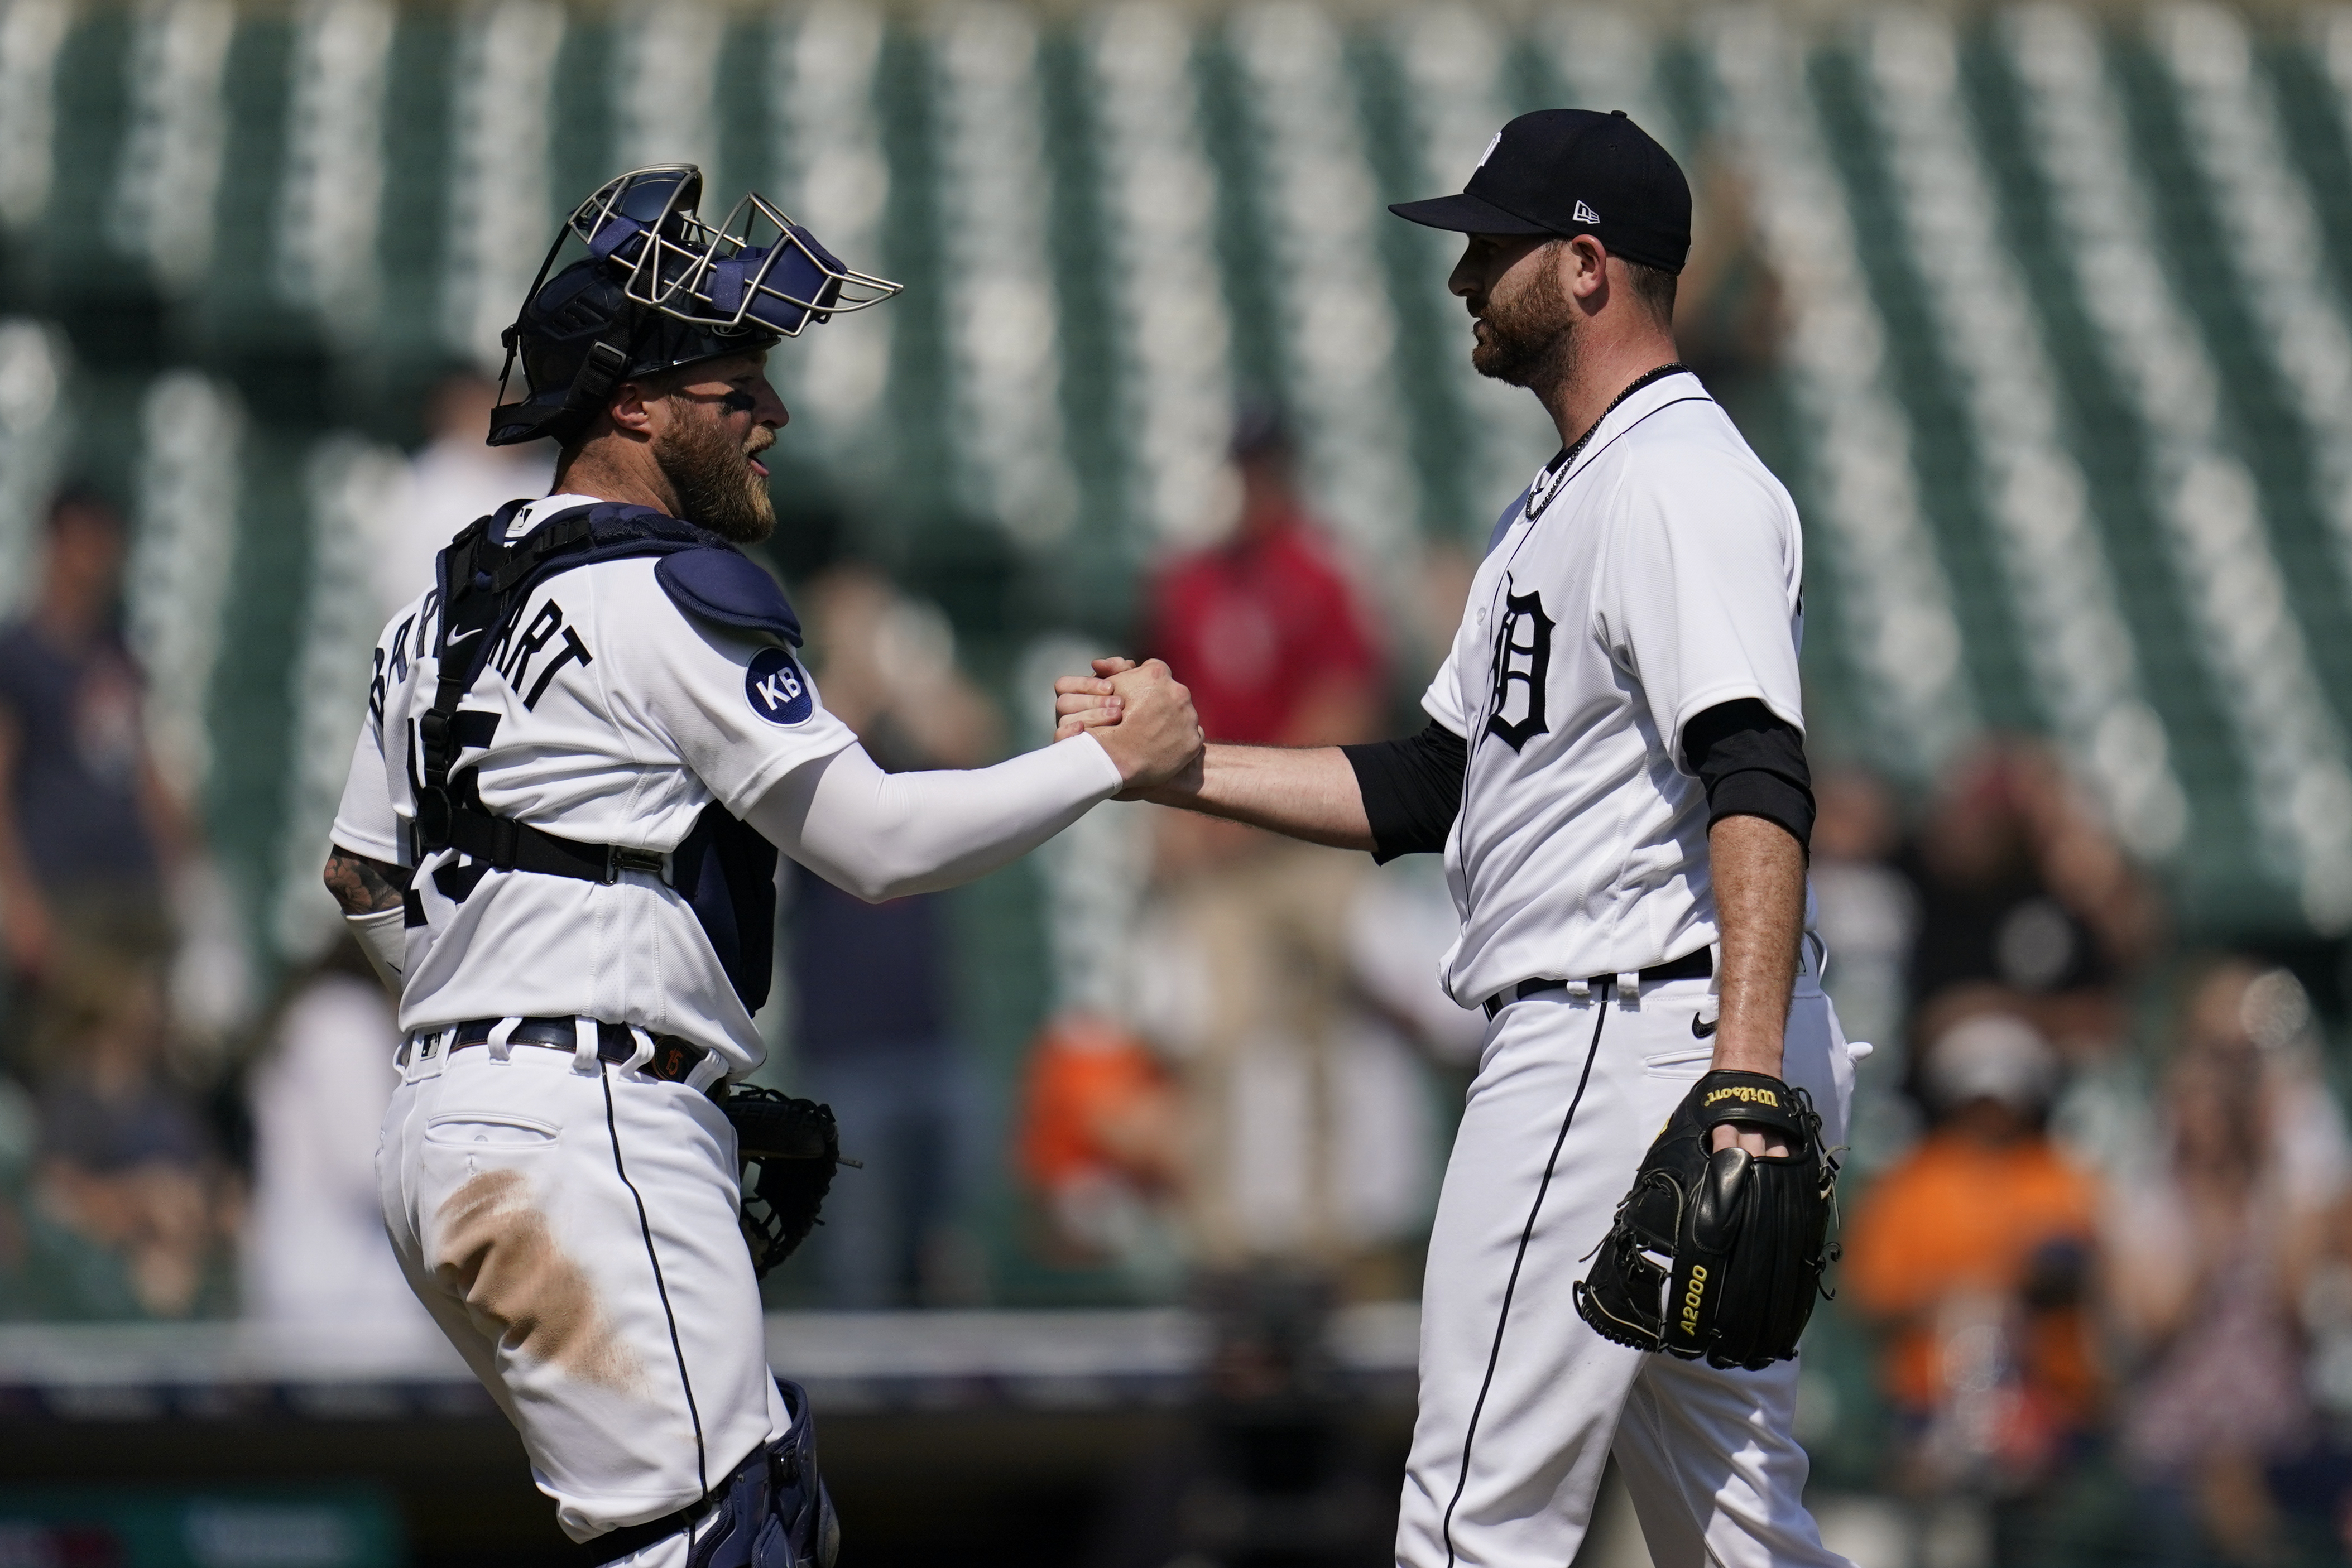 Tigers find road to success at home, beat A's 6-0, end skid